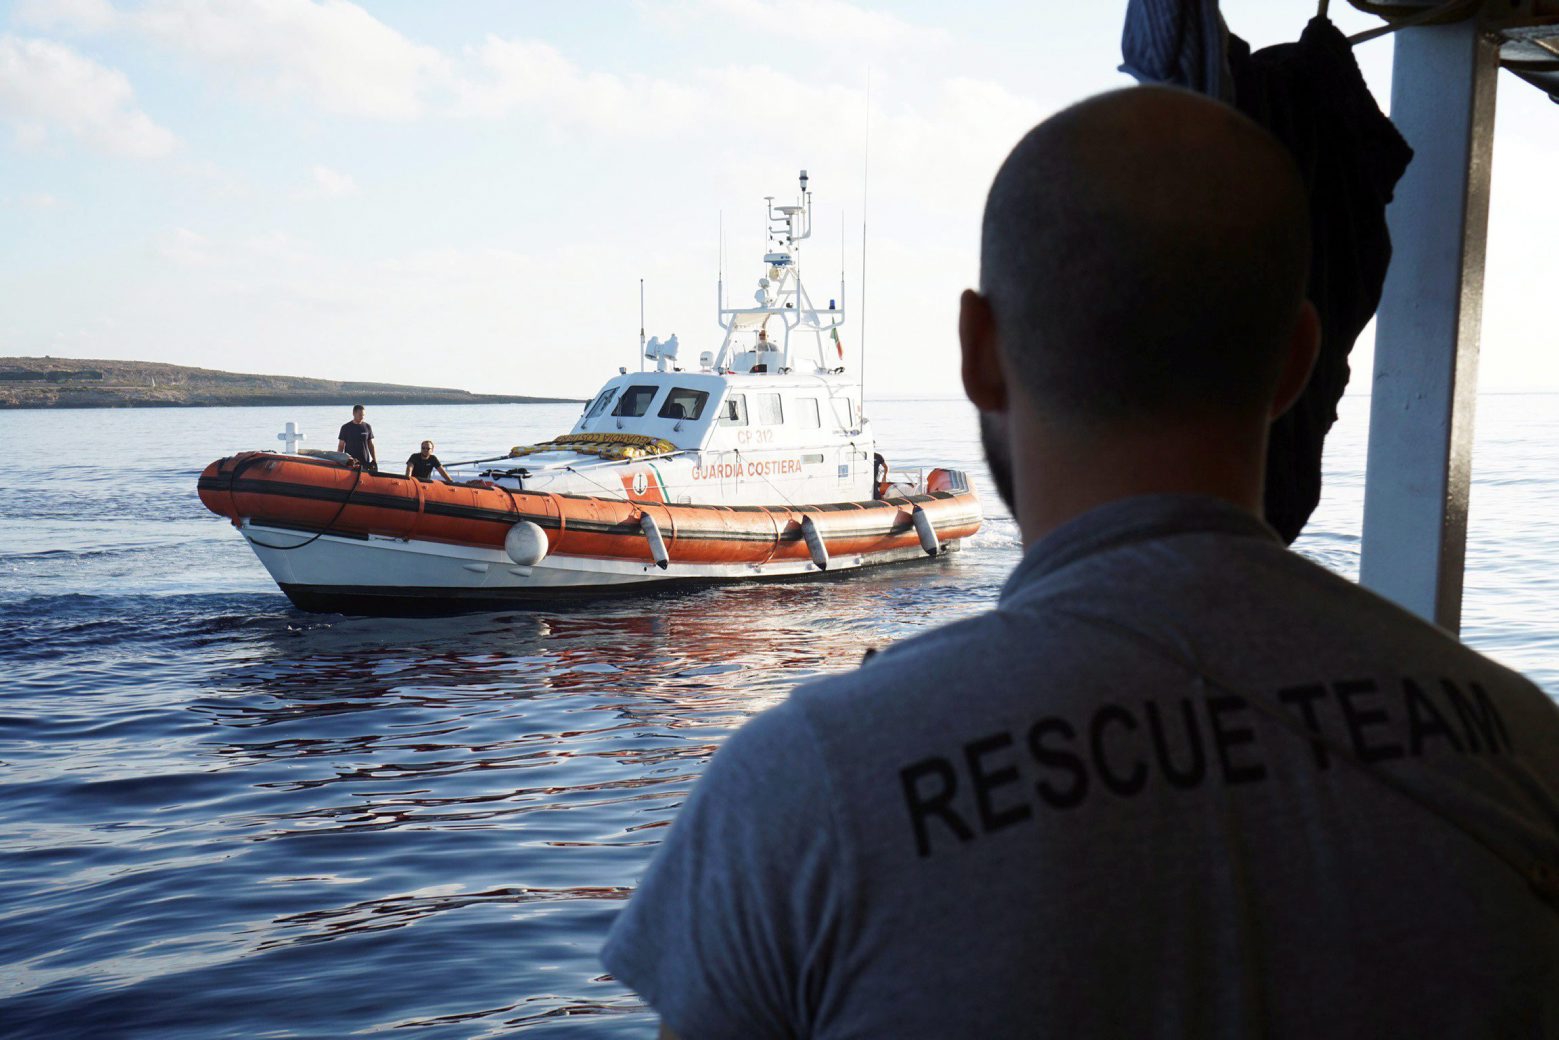 epa07778960 Italian Coast Guard keeps an eye on Spanish rescue vessel Open Arms with 107 migrants, near Lampedusa, Italy, 18 August 2019. A day after 27 minors and ill migrants were evacuated, the rescue vessel is still stranded off coast of Italy as it waits to reach a safe port in the Mediterranean sea, despite the Lazio Regional Administrative Court accepted its appeal, suspending the ban on entry into Italian waters ordered by Italian Interior Minister Matteo Salvini.  EPA/FRANCISCO GENTICO ITALY MIGRATION OPEN ARMS